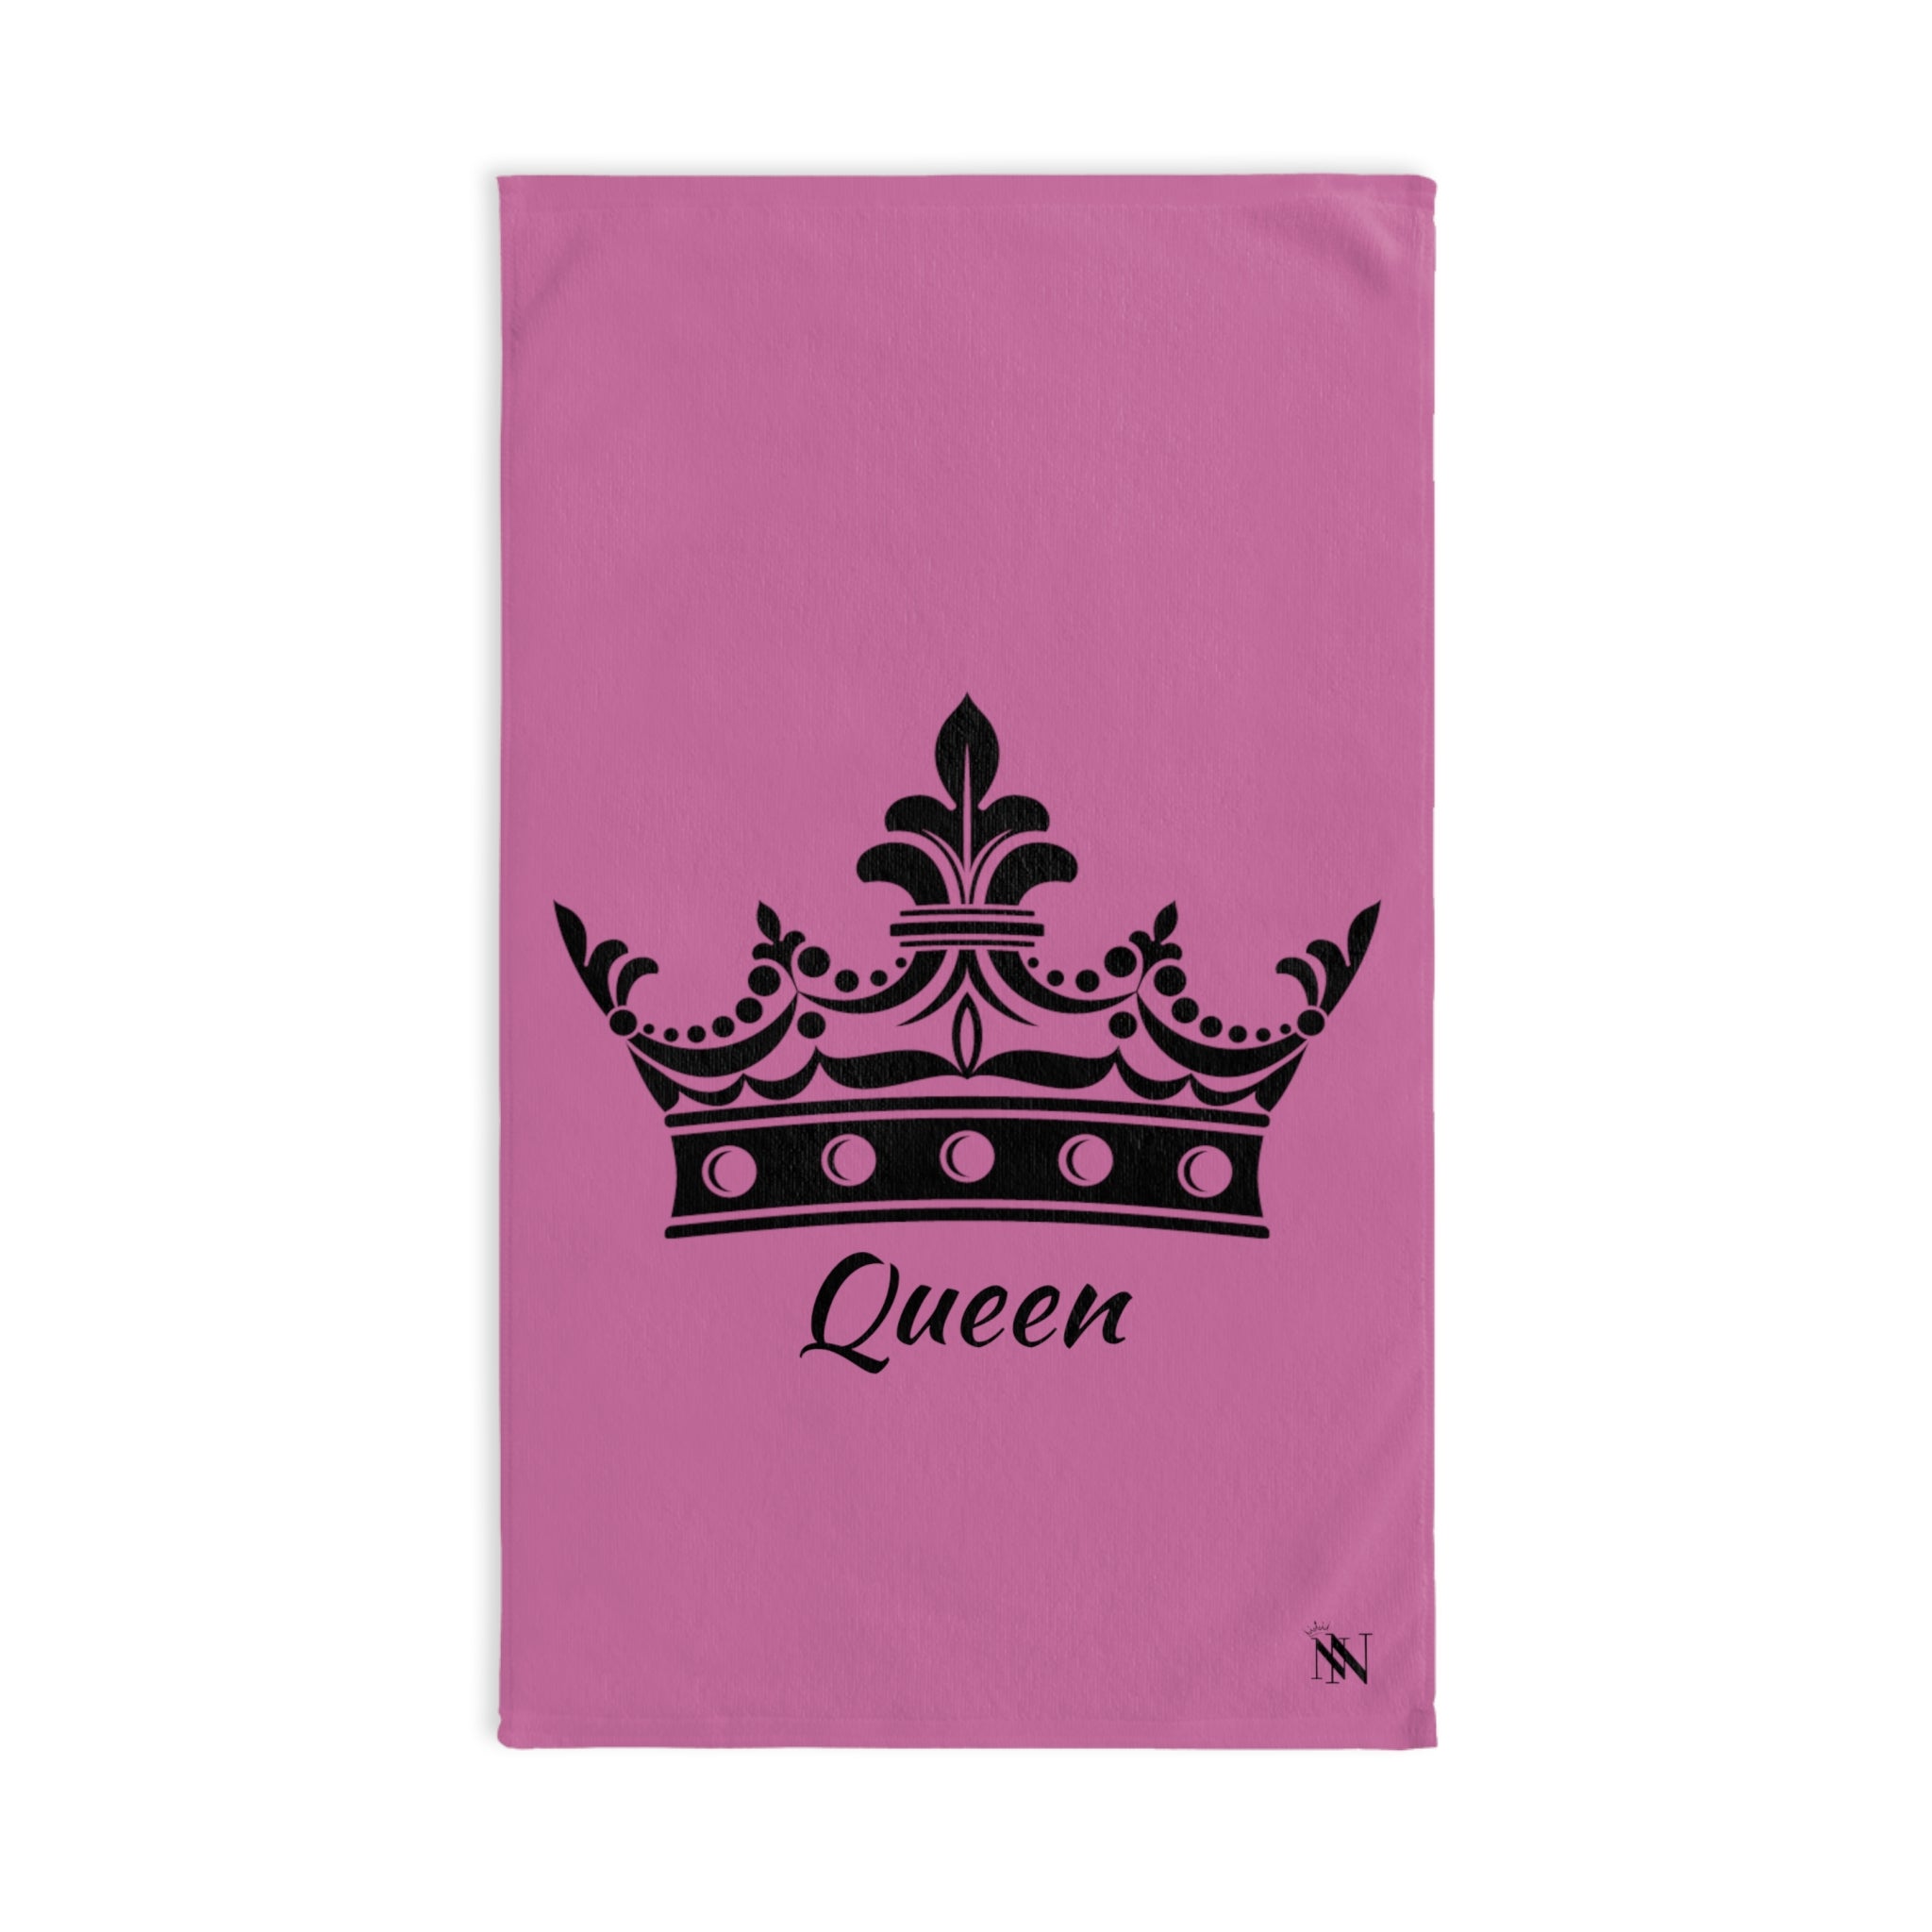 Queen Tiara CrownPink | Novelty Gifts for Boyfriend, Funny Towel Romantic Gift for Wedding Couple Fiance First Year Anniversary Valentines, Party Gag Gifts, Joke Humor Cloth for Husband Men BF NECTAR NAPKINS